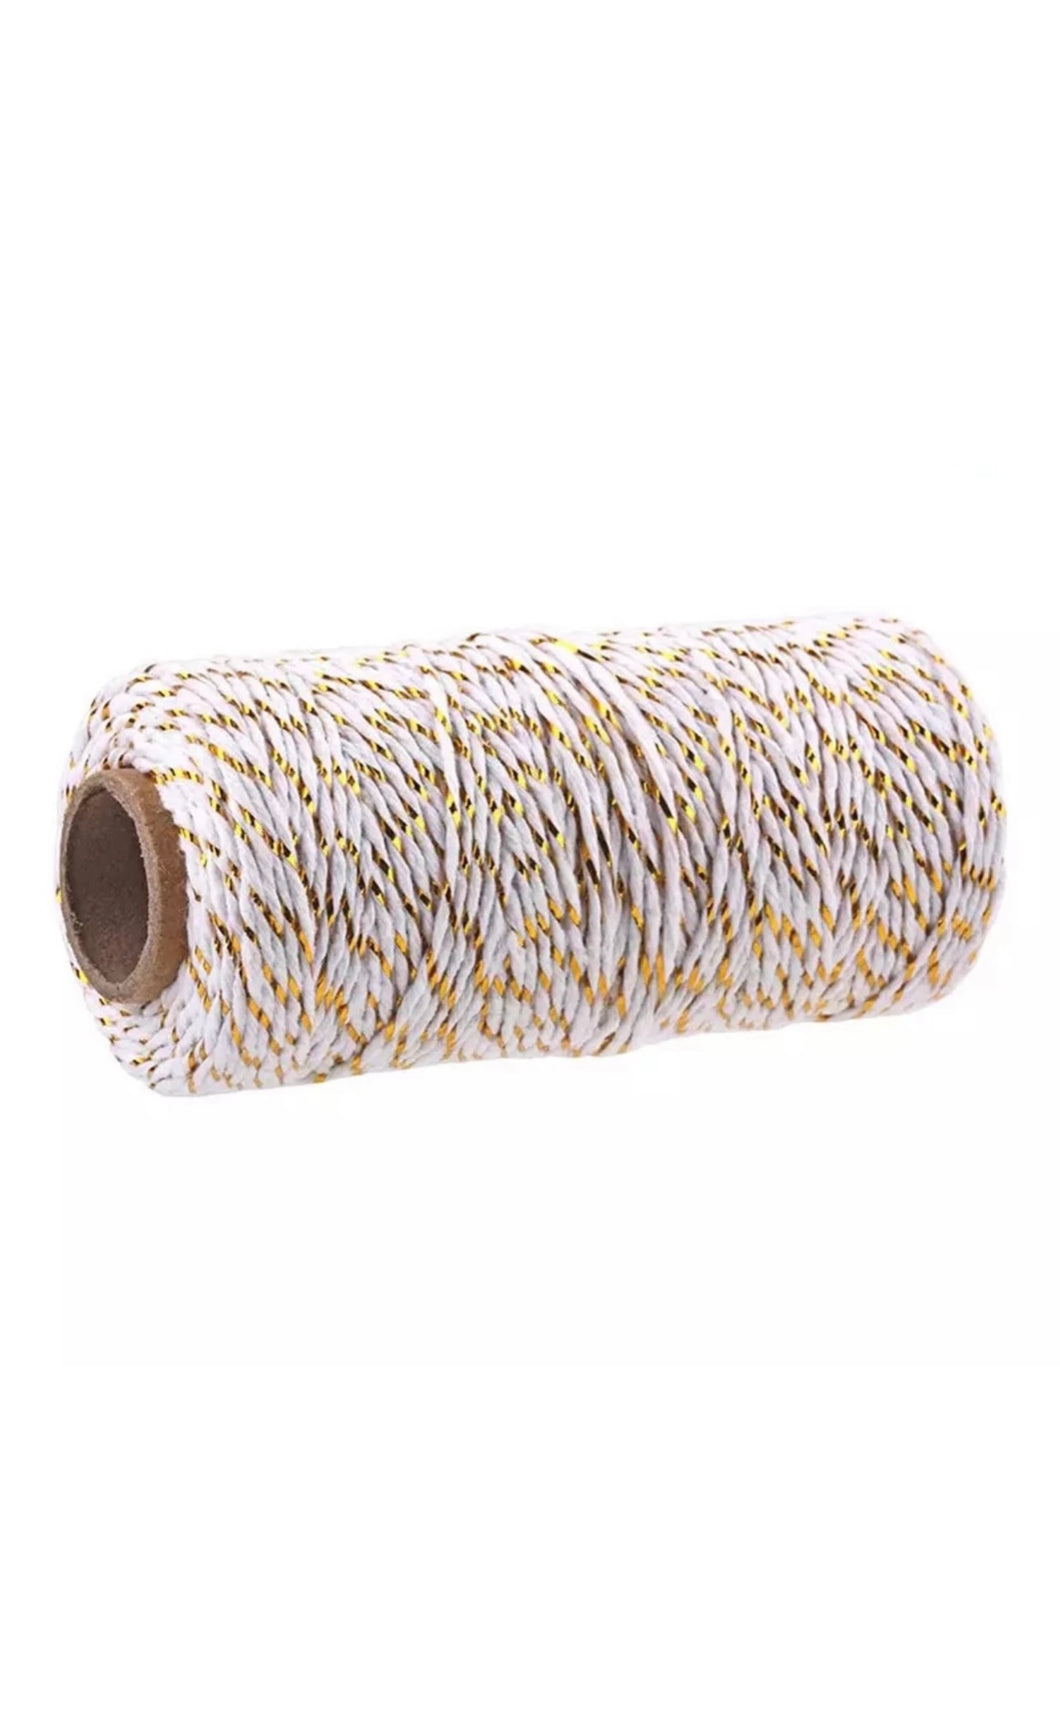 Bakers Twine 100m White/Gold